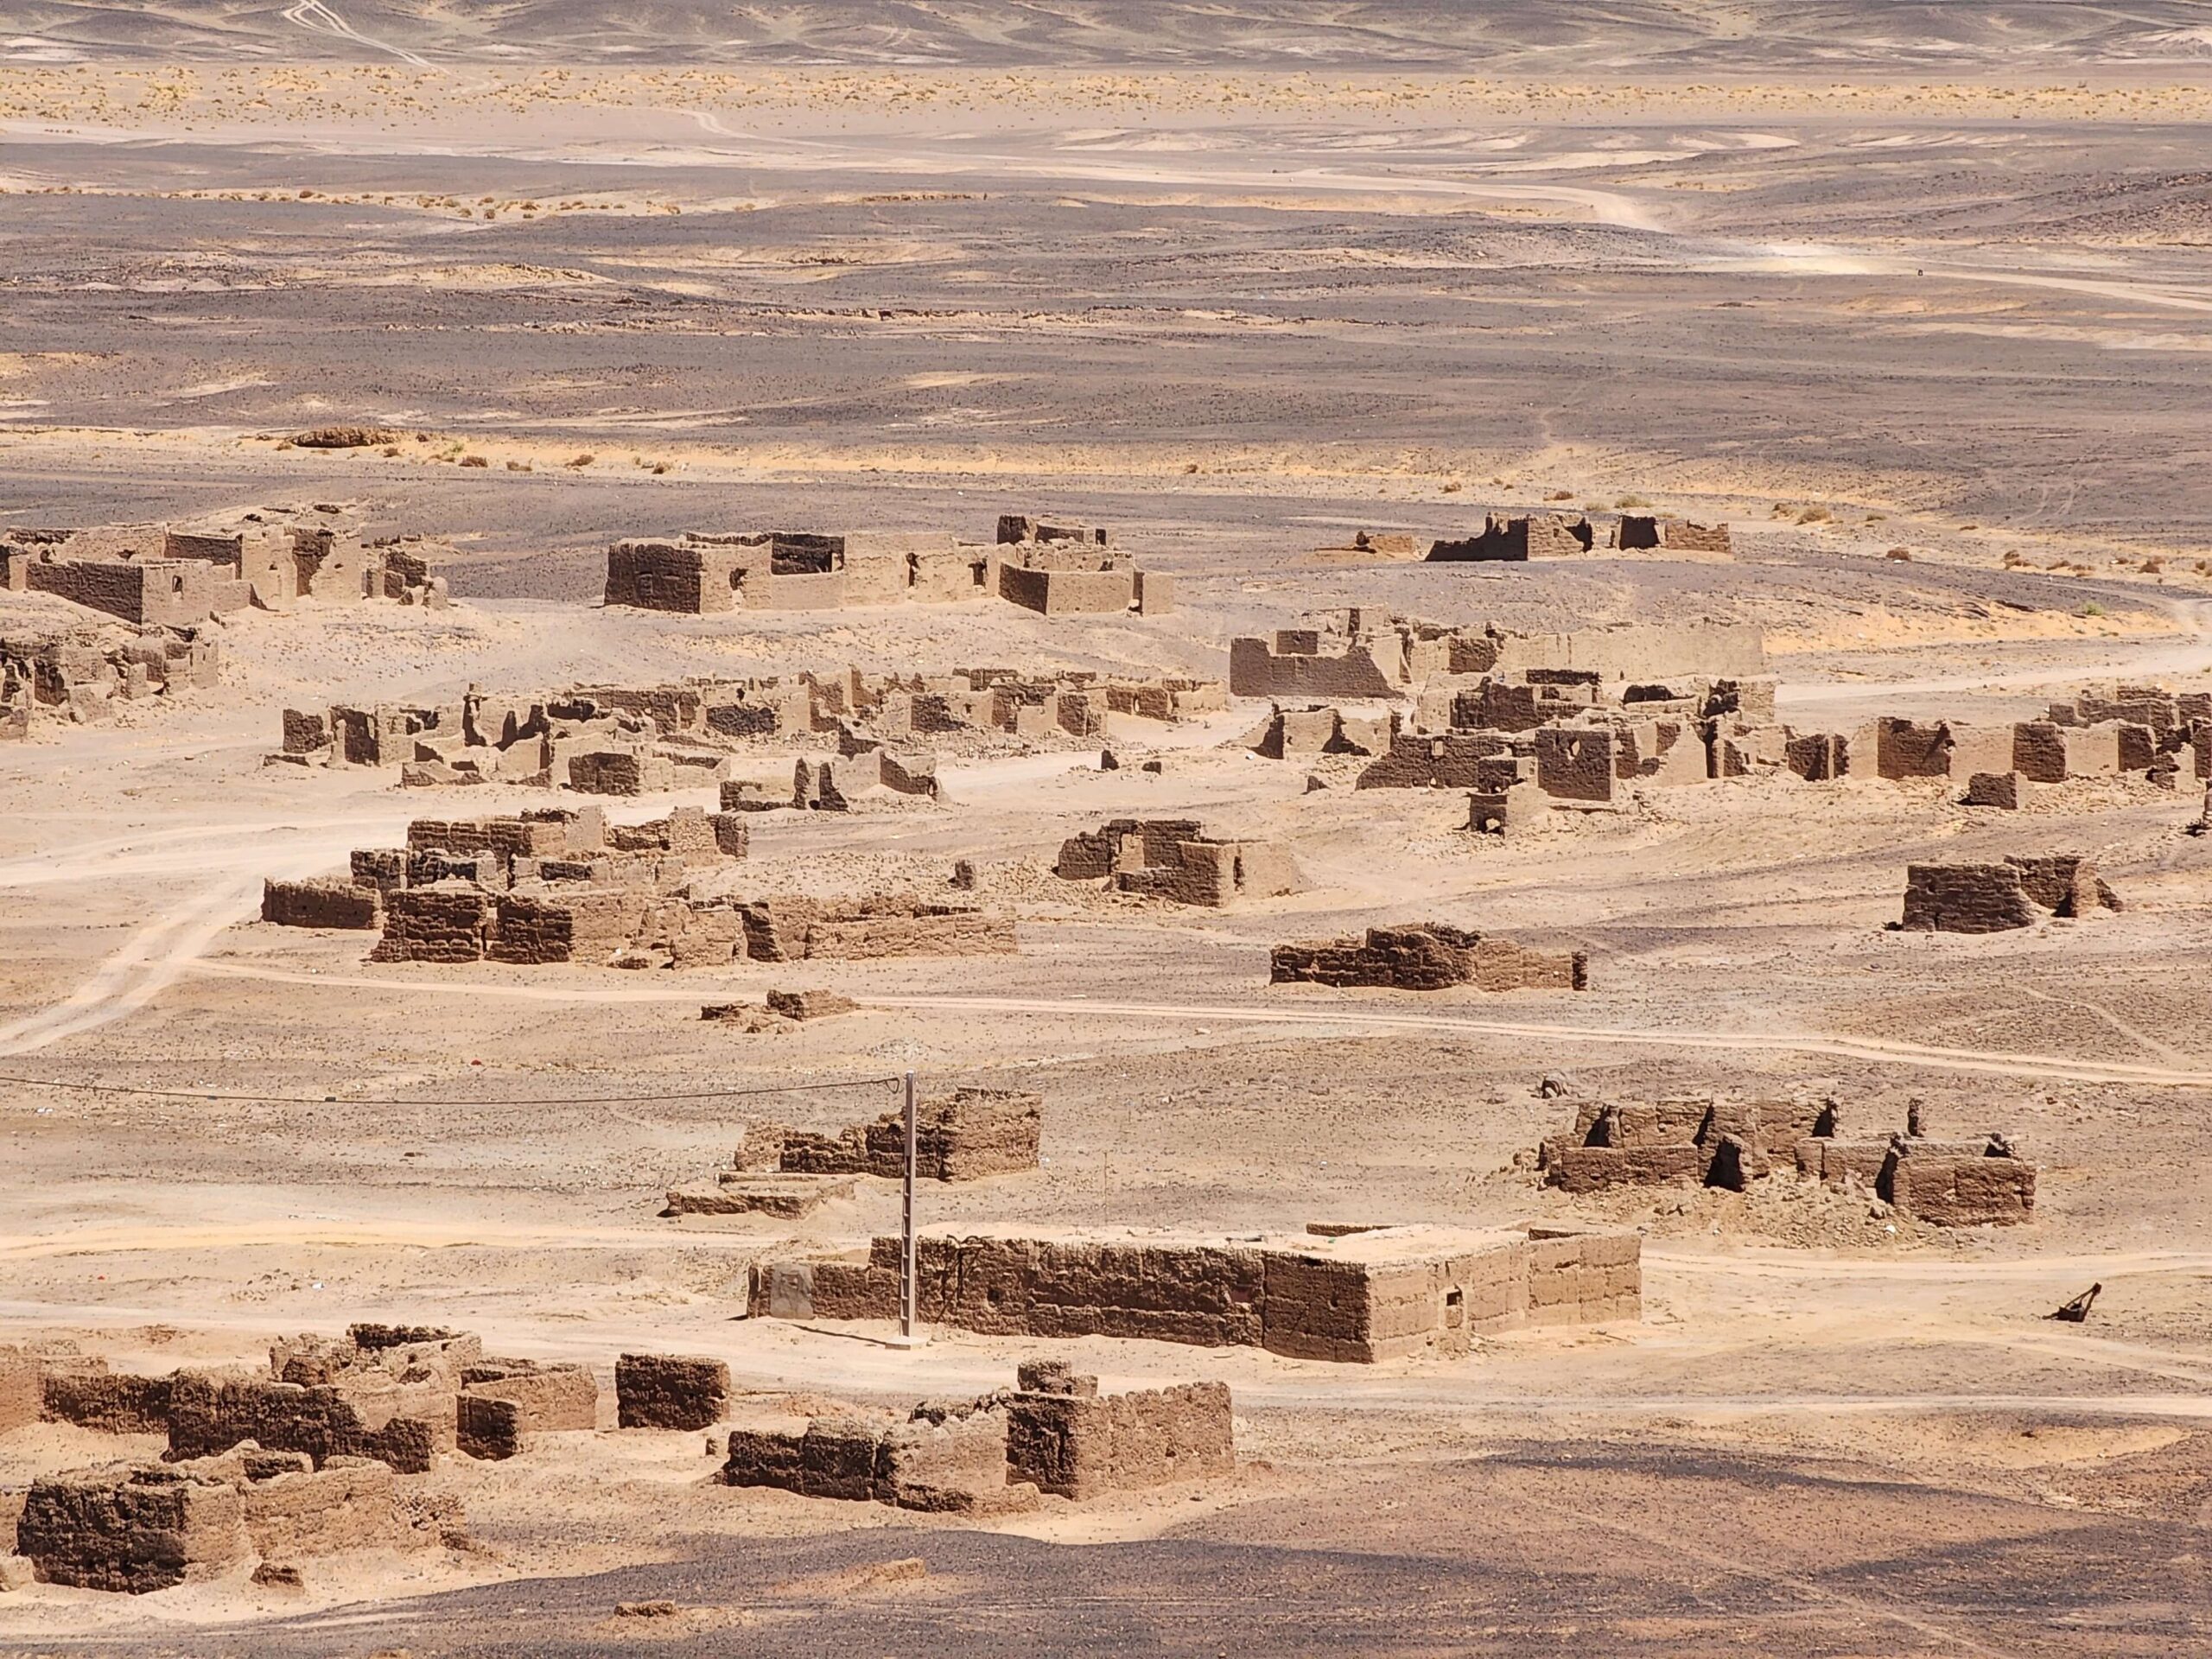 View of the abandoned town of M'fis in the Sahara Desert